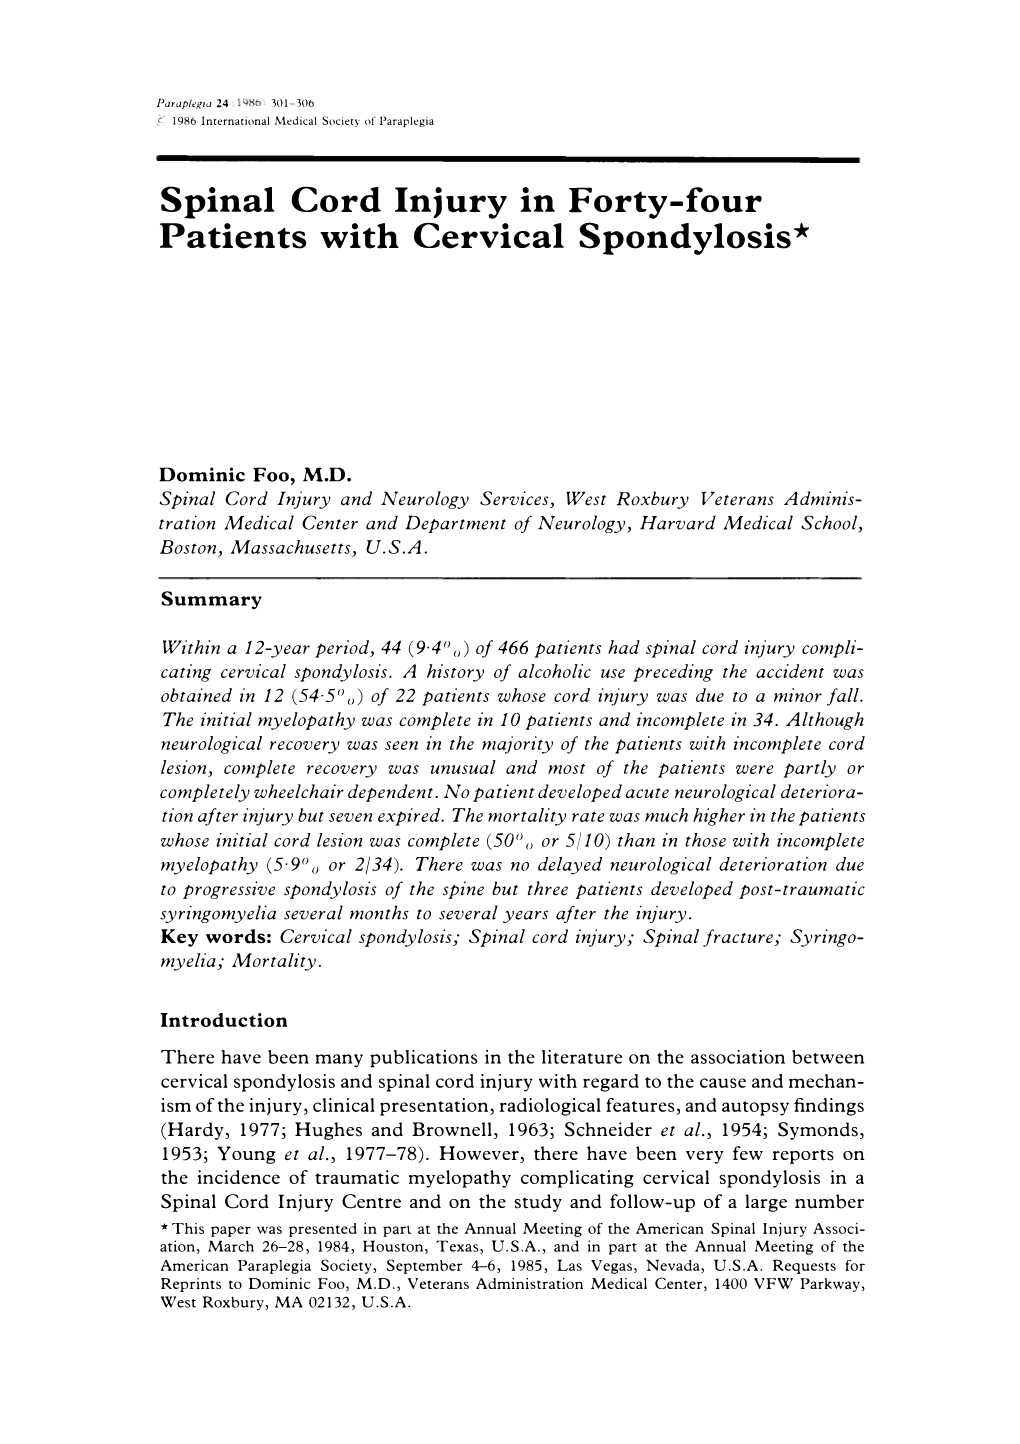 Spinal Cord Injury in Forty-Four Patients with Cervical Spondylosis*